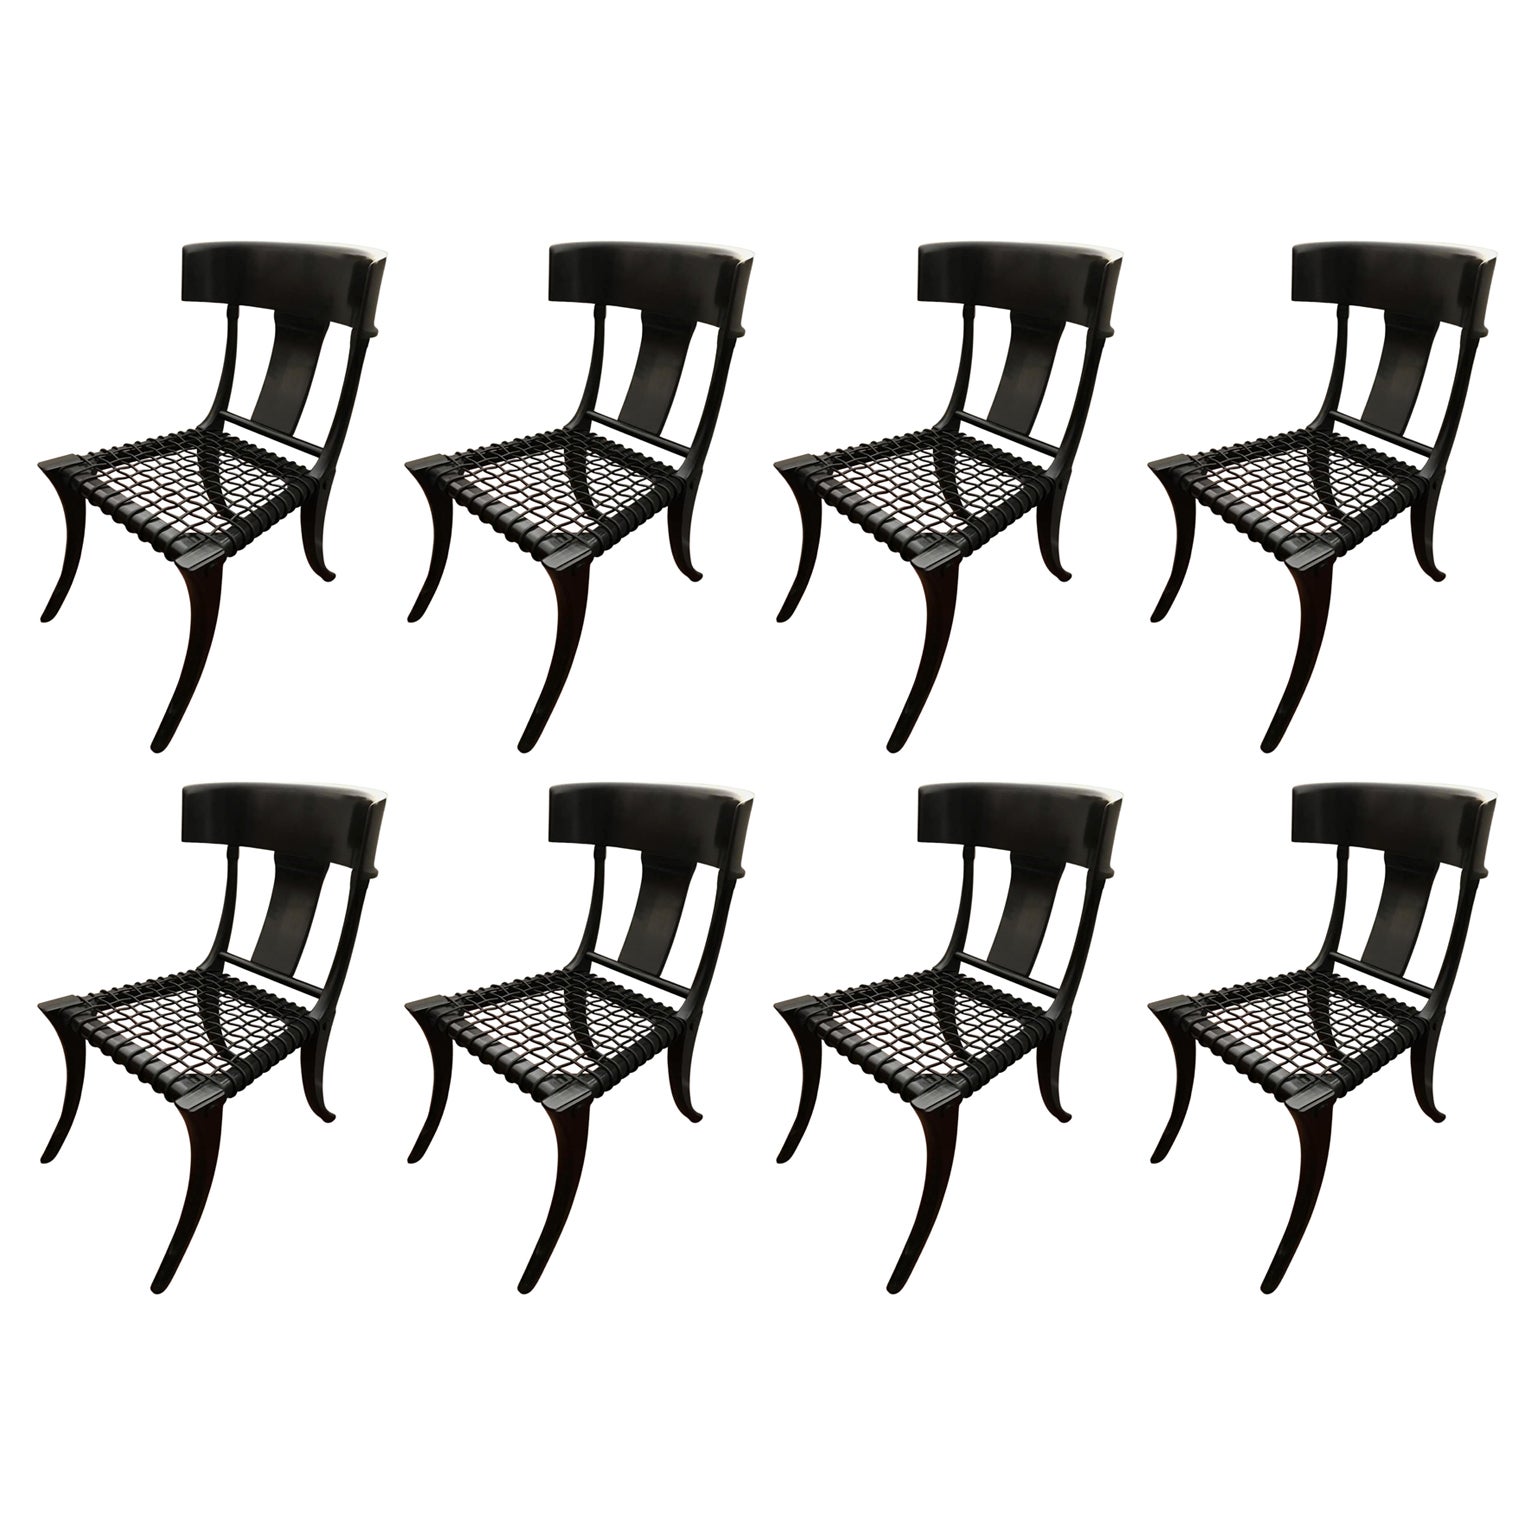 Black Woven Leather Seat Walnut Saber Legs Klismos Chairs Customizable Set of 8 For Sale